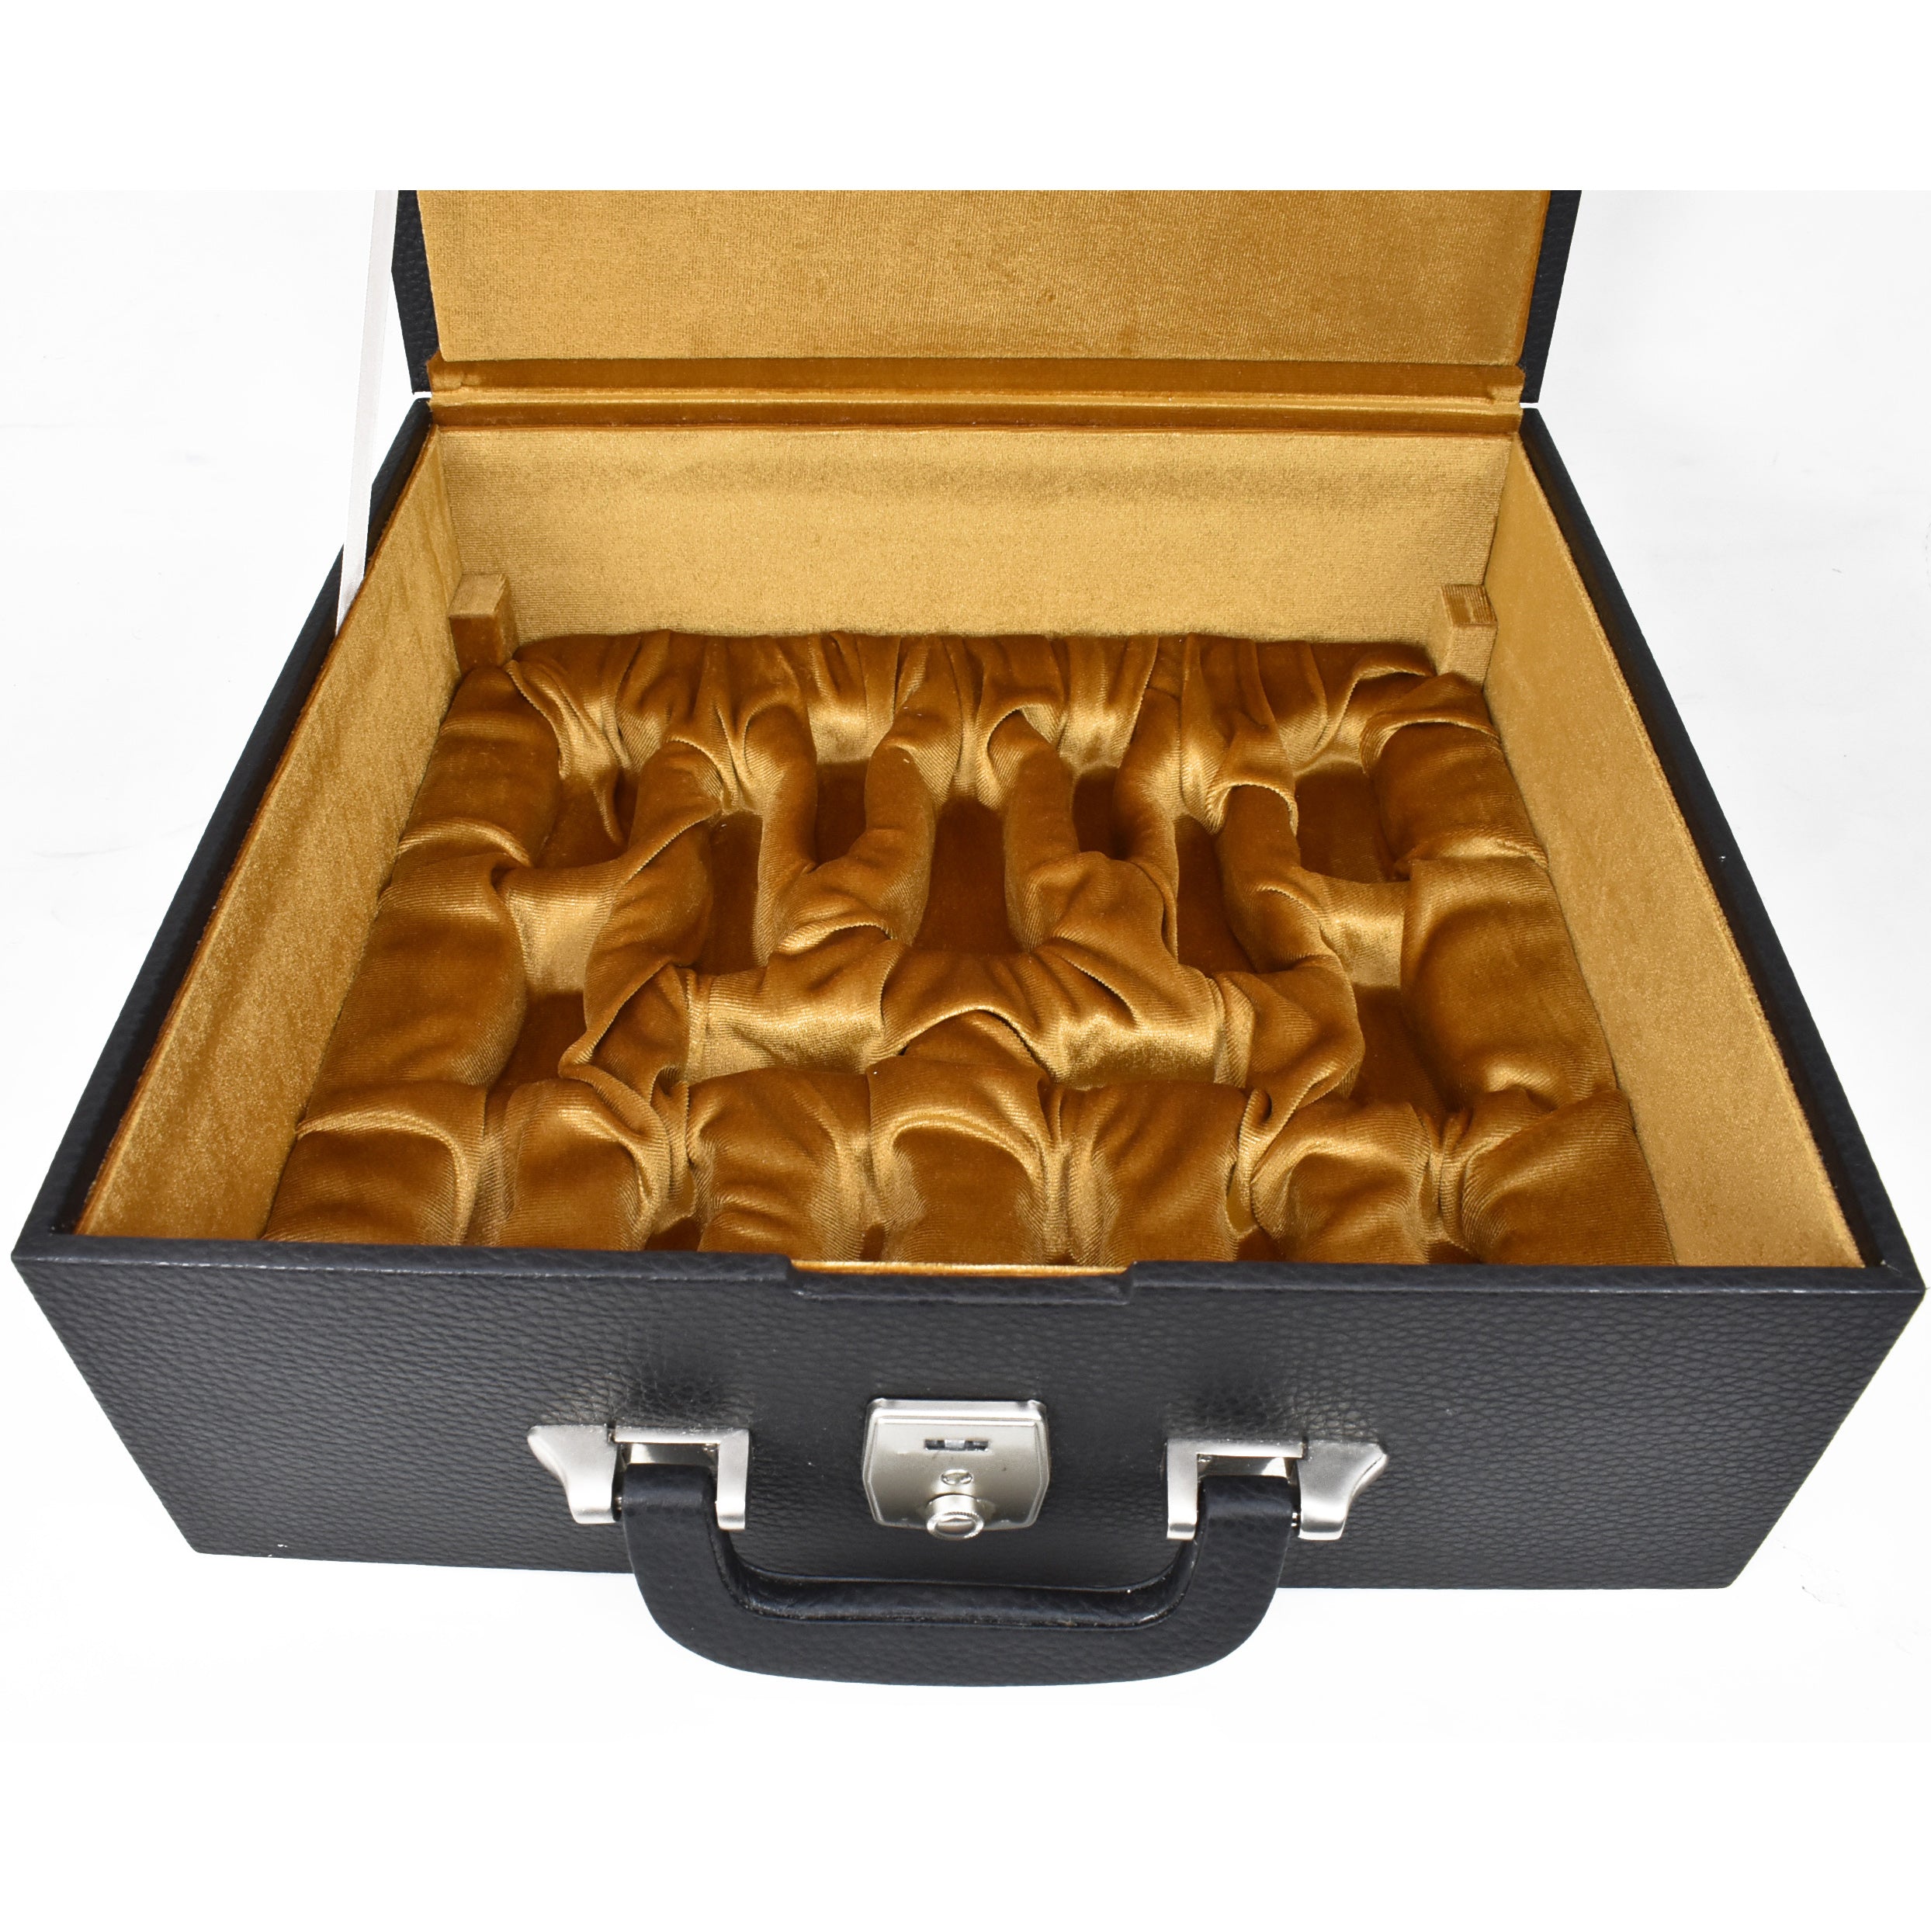 Combo of 3.7" Emperor Series Staunton Chess Pieces in Bud Rosewood with 21" Chess board and Leatherette Coffer Storage Box